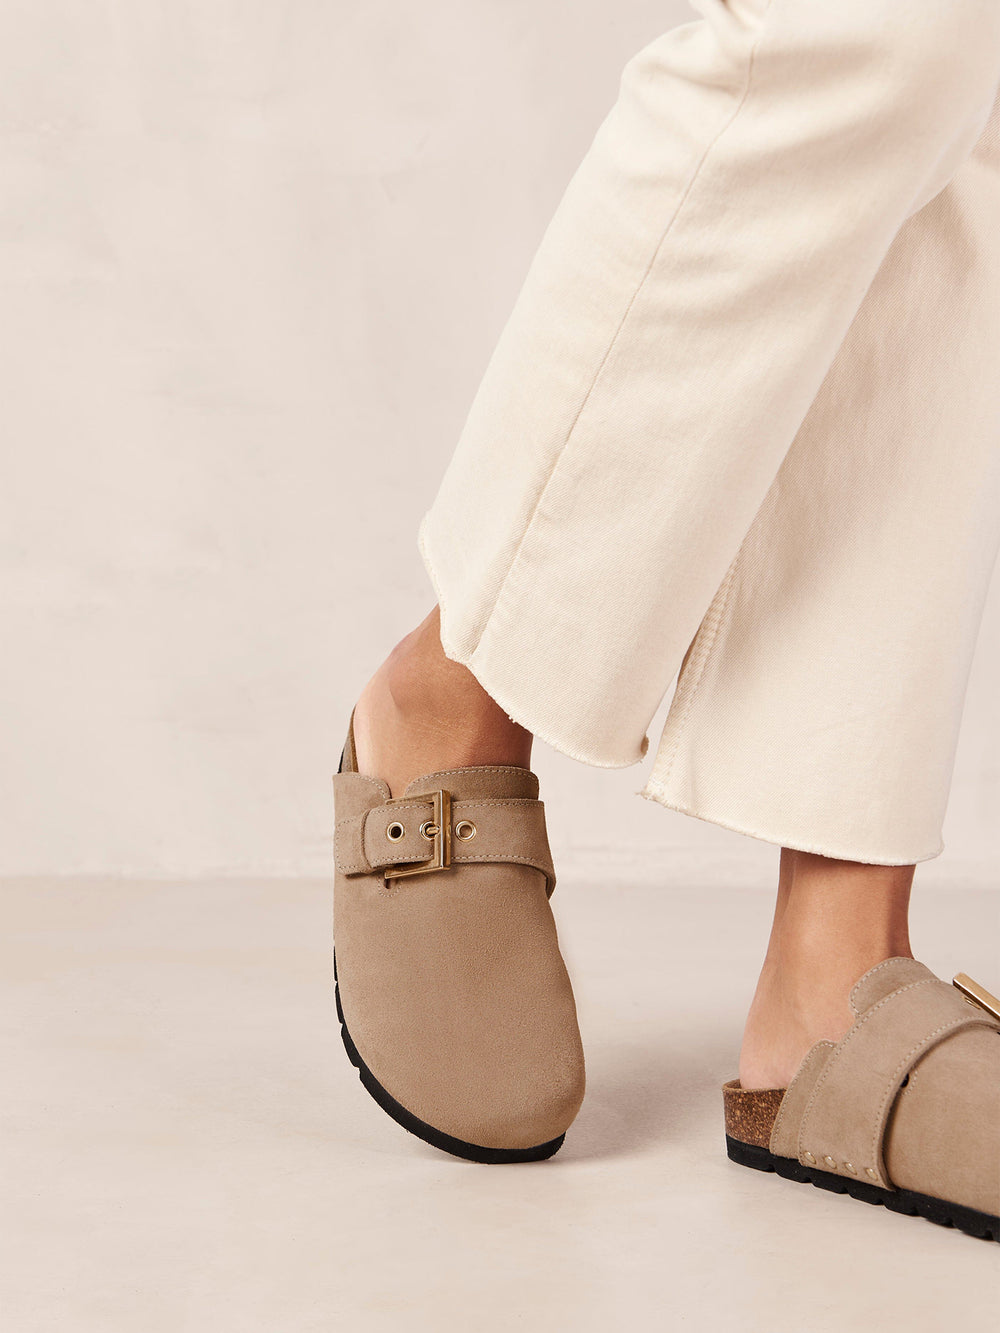 Alohas Cozy Suede Clogs in Taupe